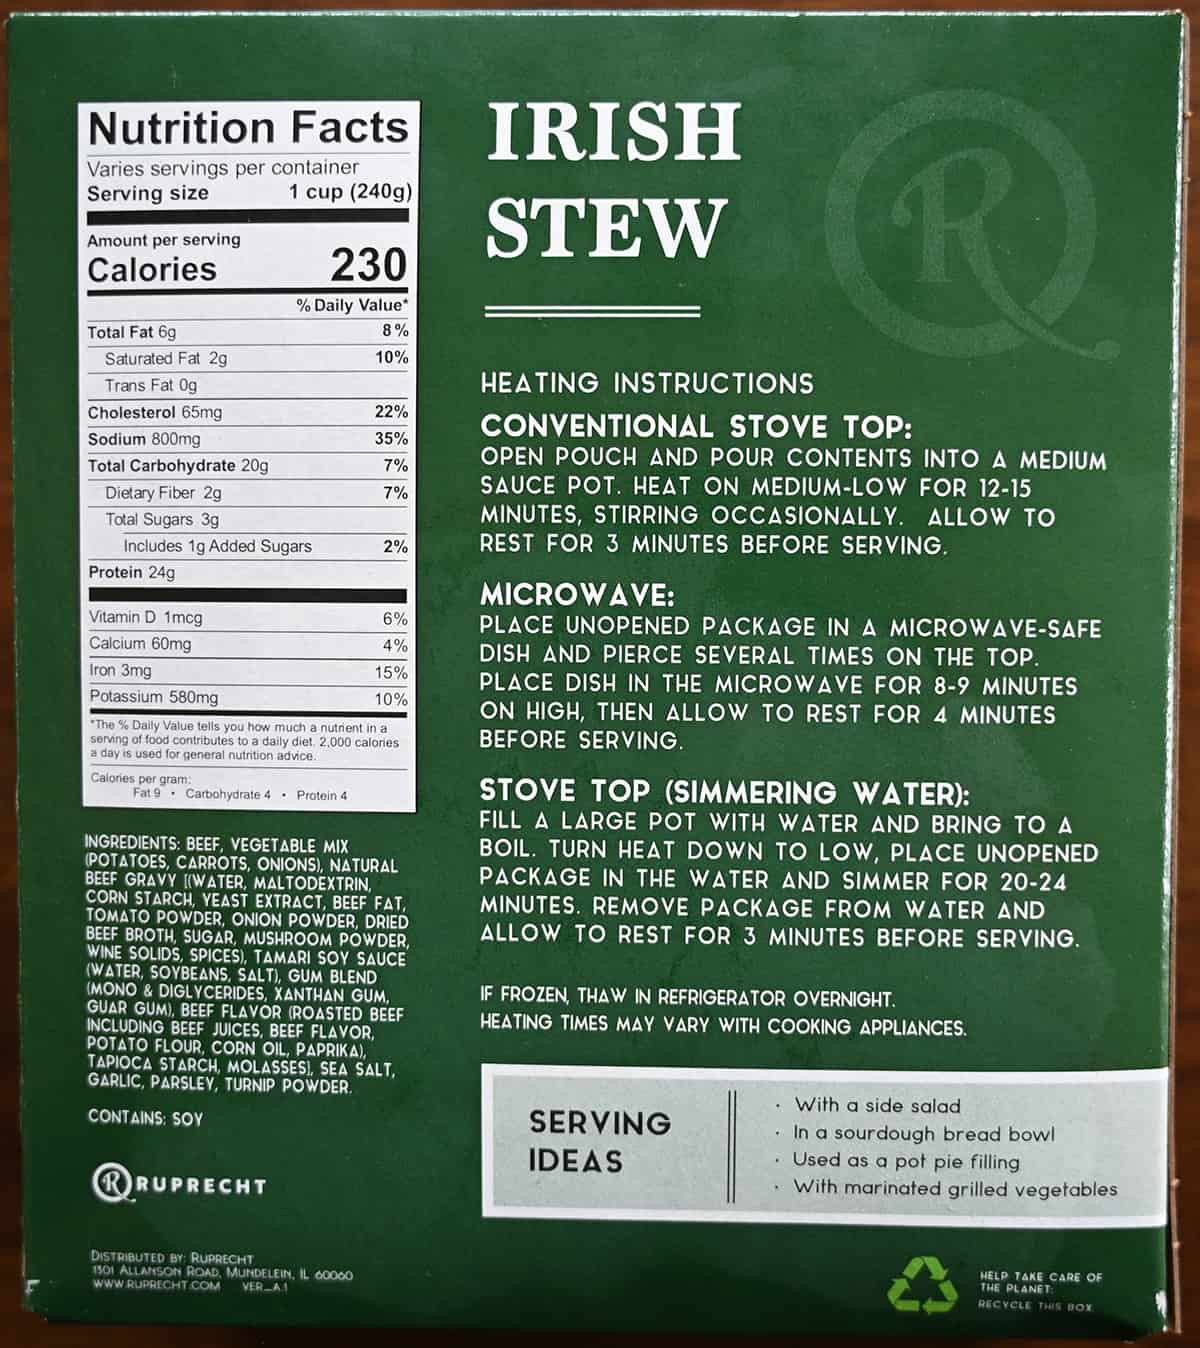 Image of the back of the box of stew showing ingredients, nutrition facts and cooking instructions.